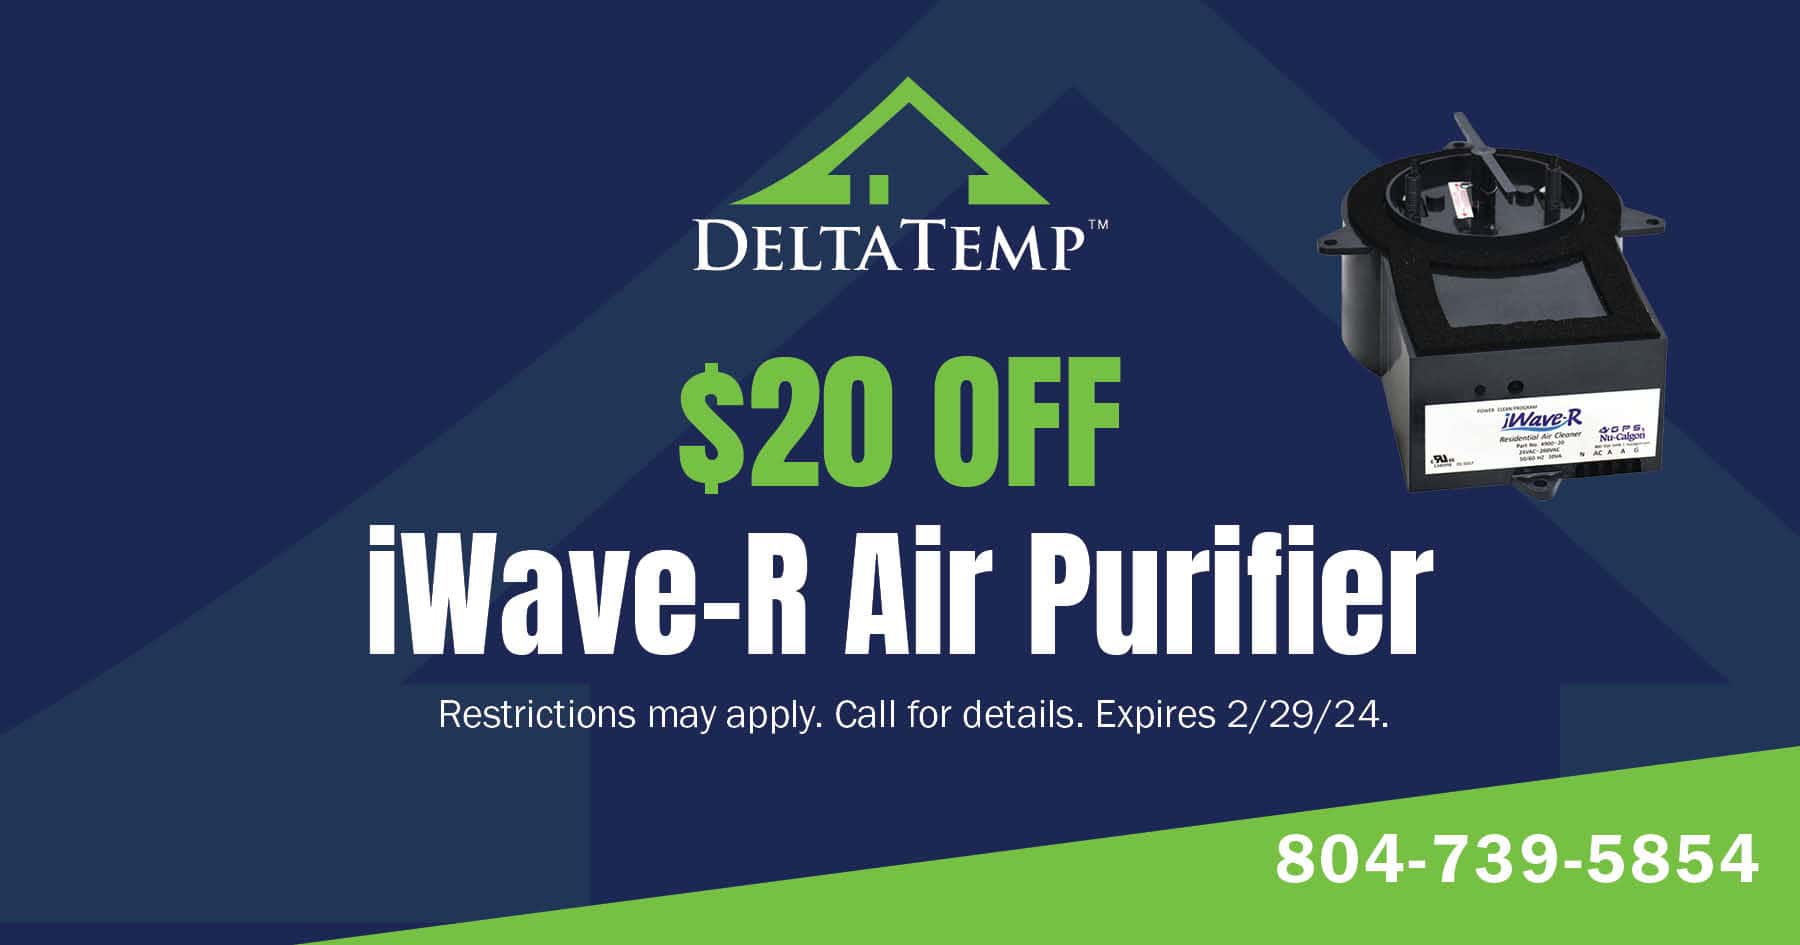  off iWave-r air purifier. Restrictions may apply. Call for details. Expires 2/29/2024.